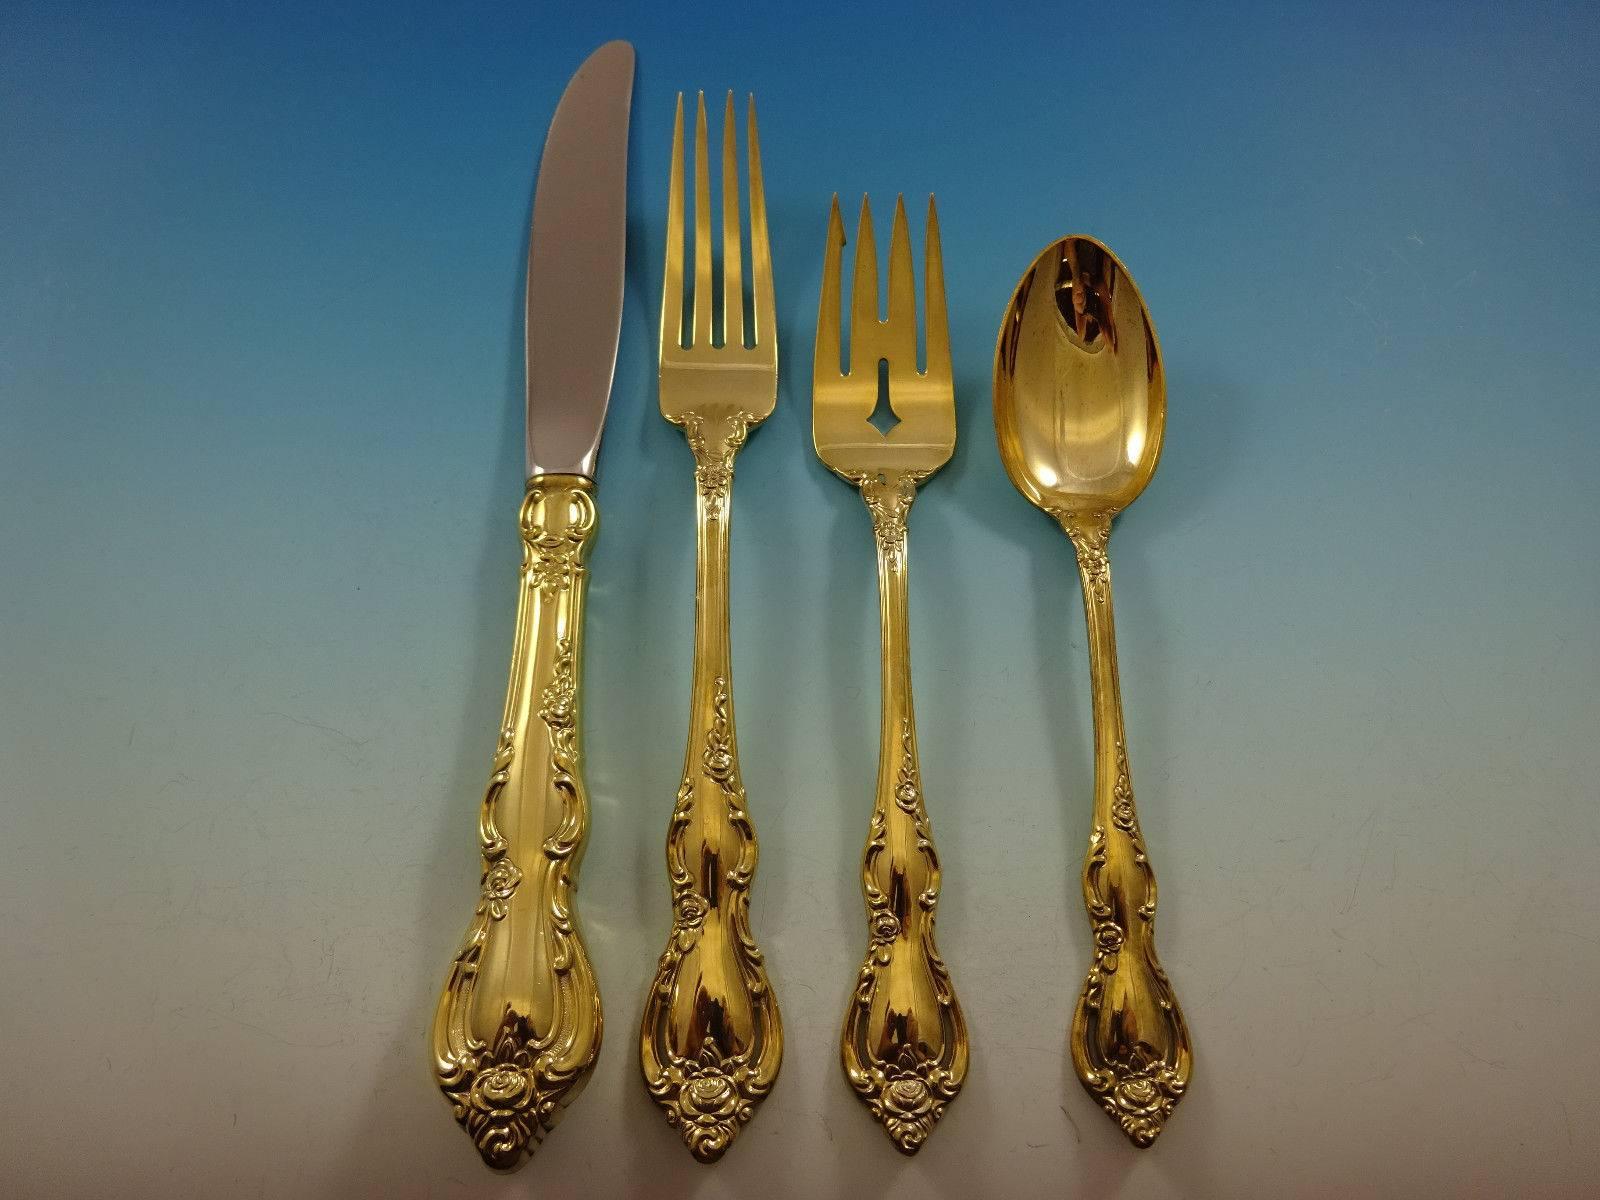 Gorgeous Spanish provincial gold by Towle sterling silver flatware set, 48 pieces. Gold flatware is on trend and makes a bold statement on your table. 

This set is vermeil (completely gold-washed) and includes:
 
12 knives, 8 7/8